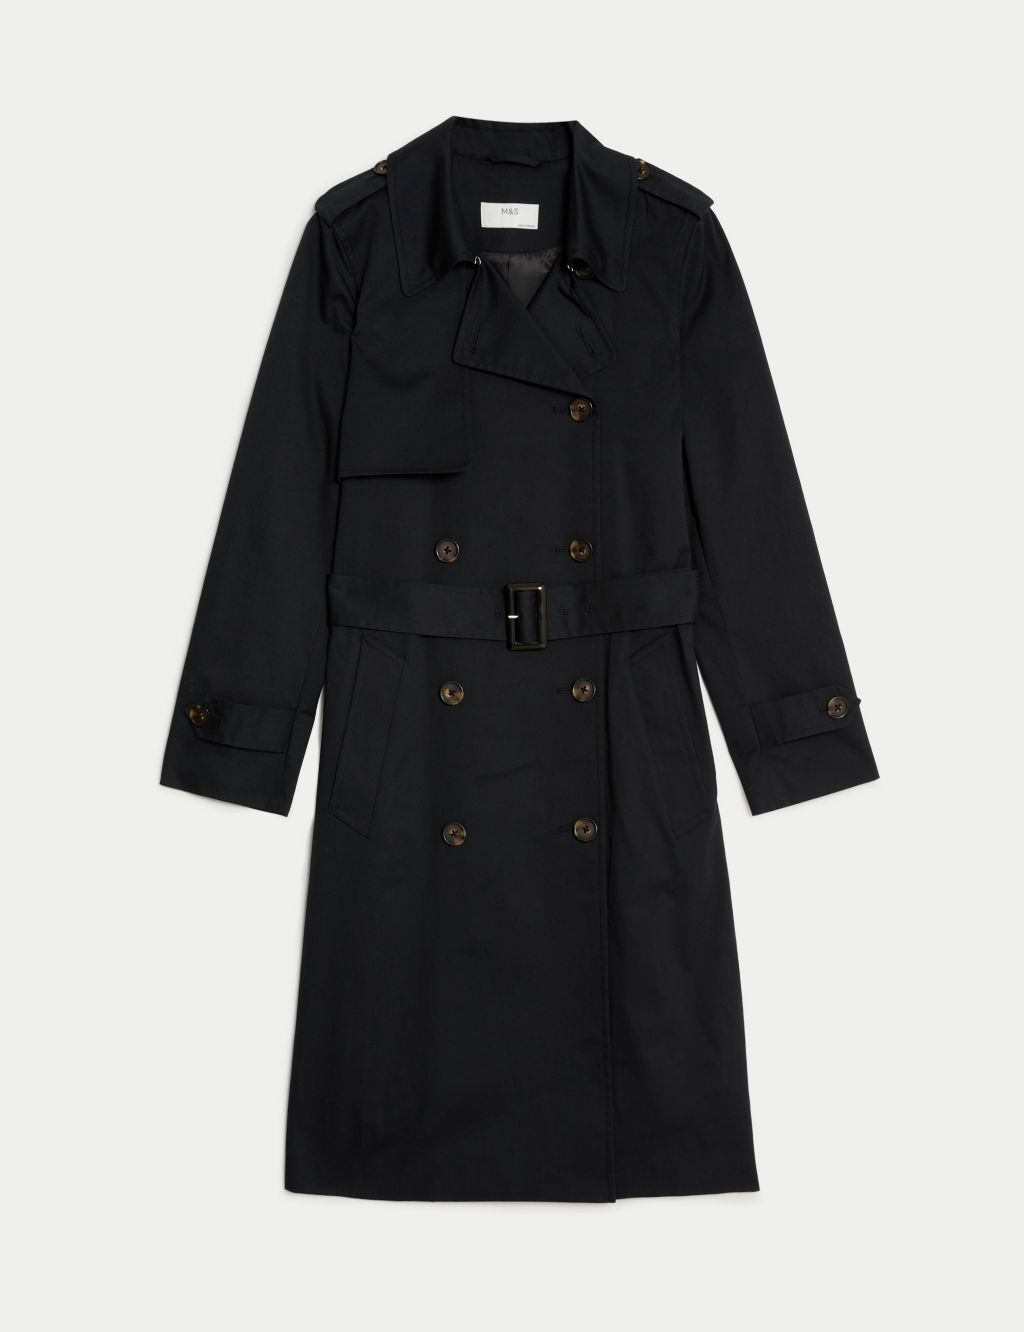 Petite Cotton Rich Double Breasted Trench Coat image 2